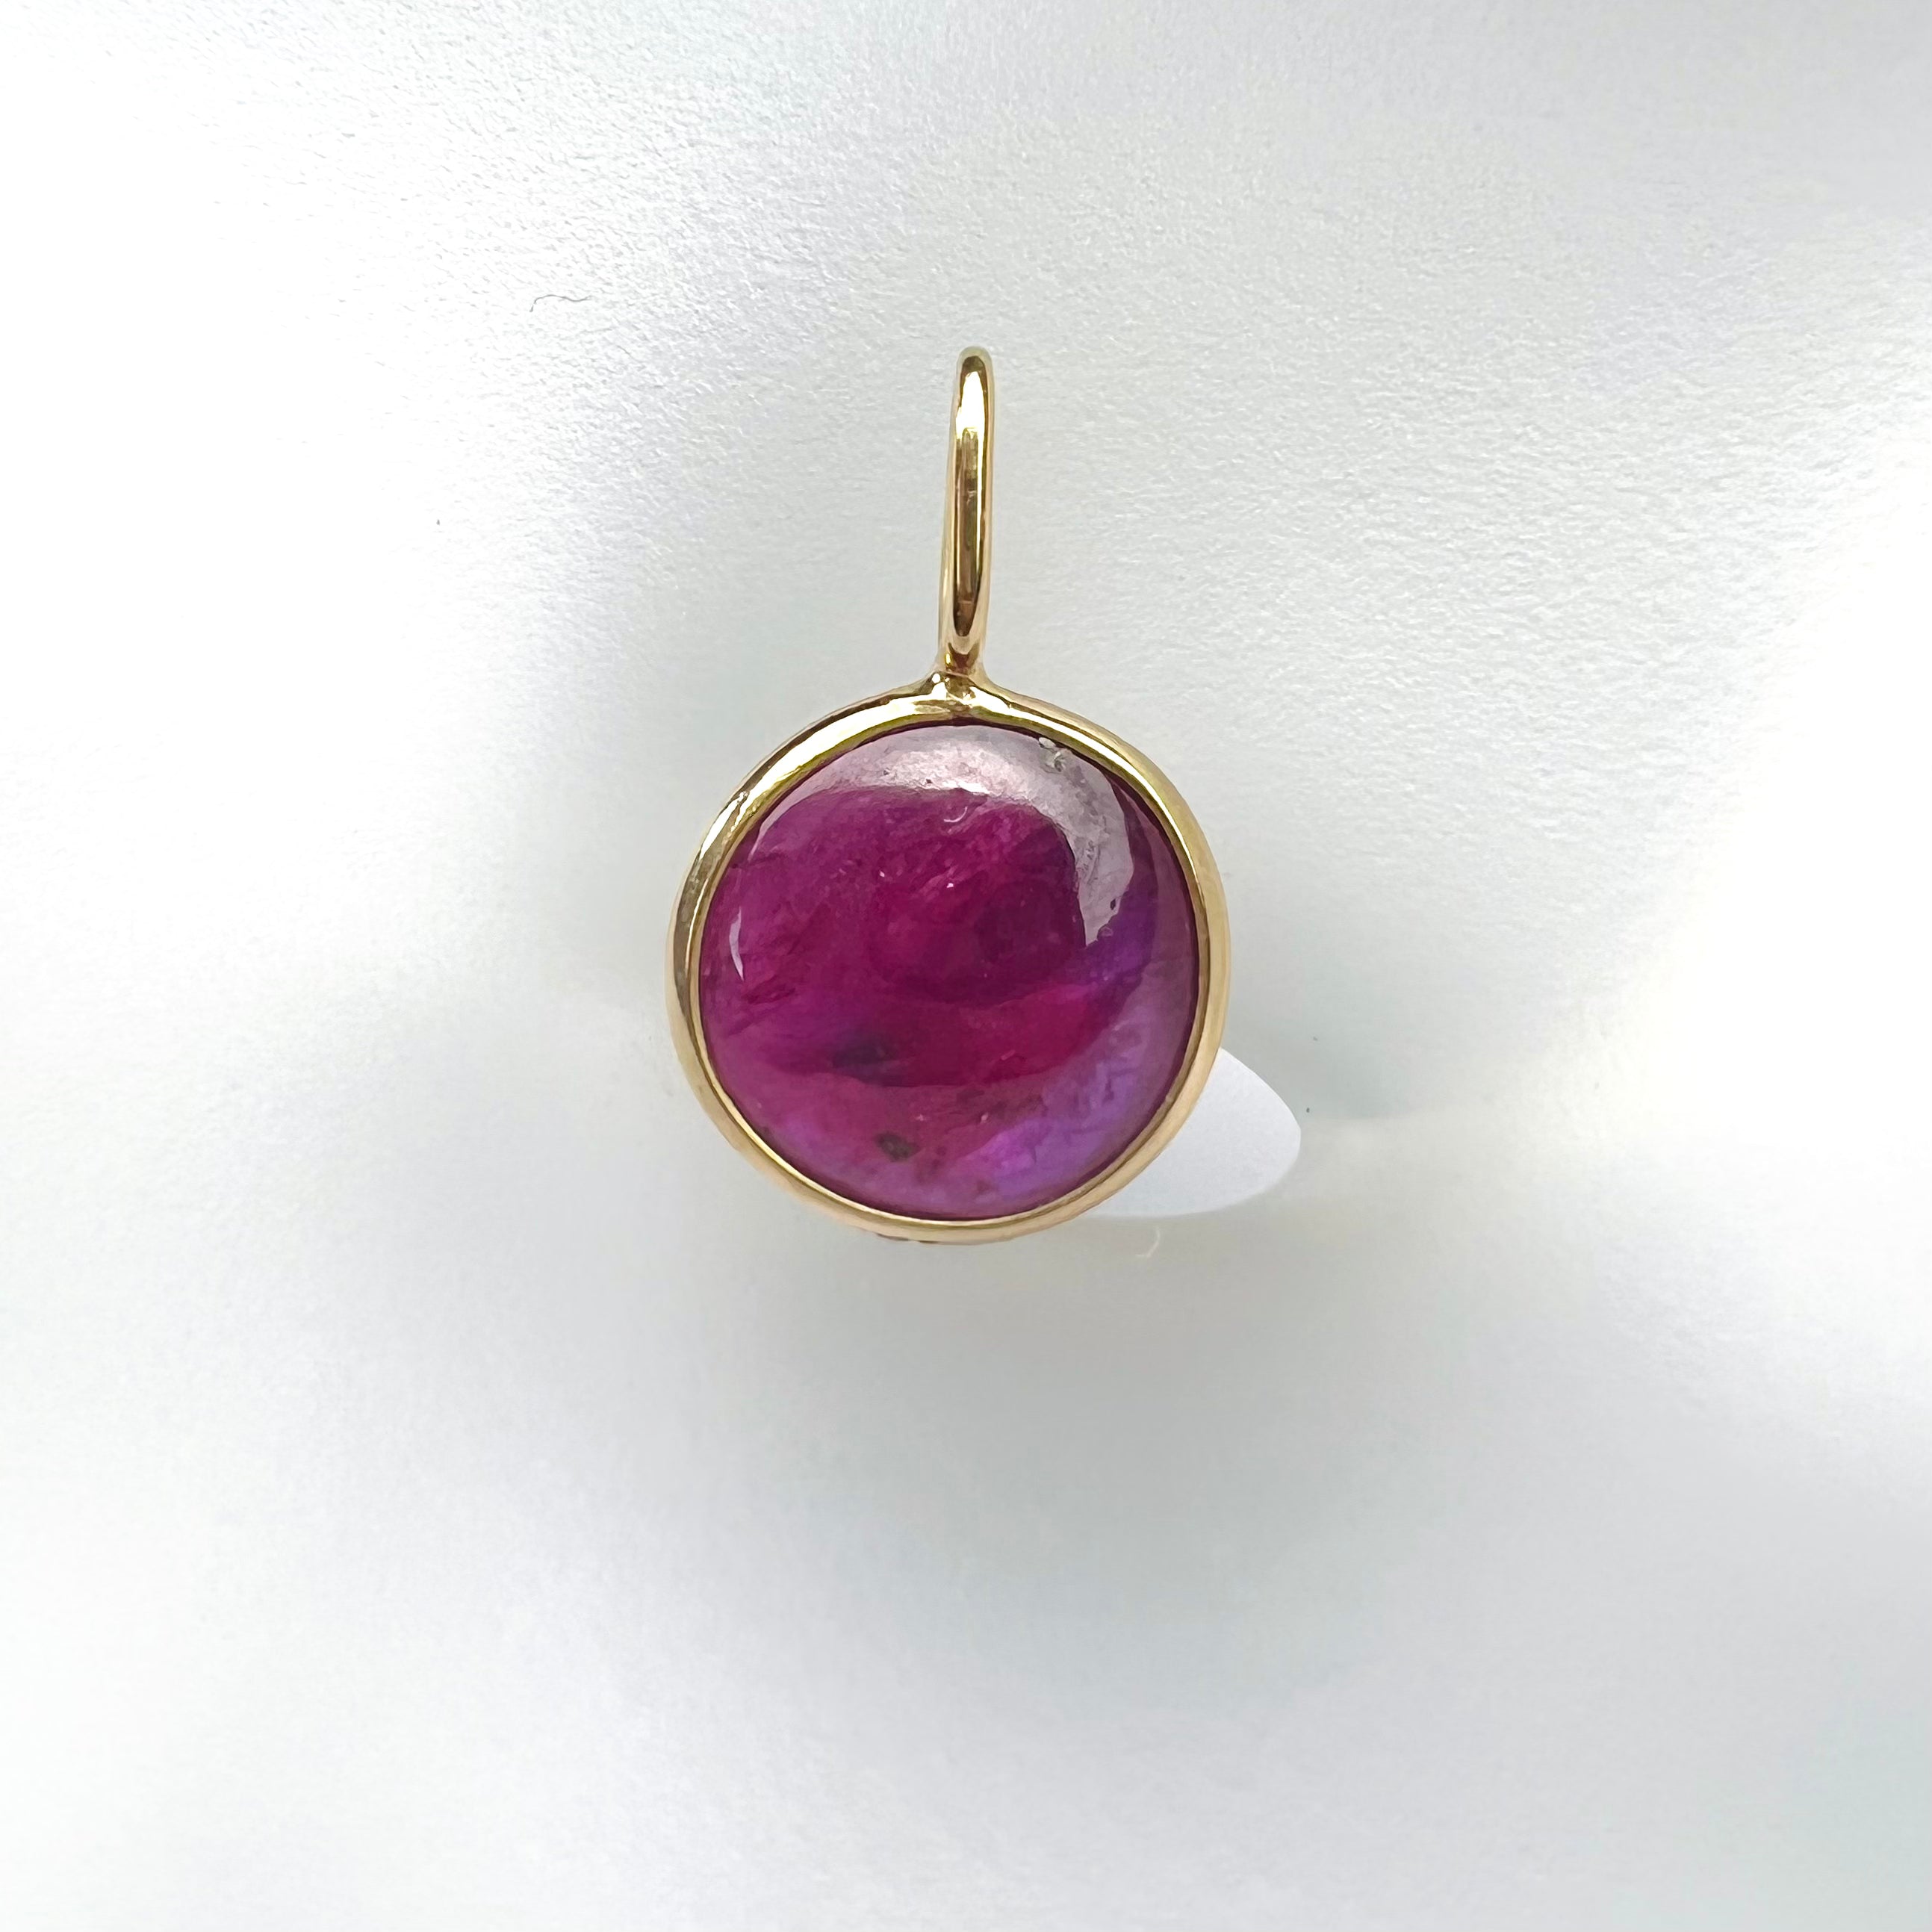 5CT Cabochon Pink Tourmaline in 18K Yellow Gold Charm Pendant 18x11mm